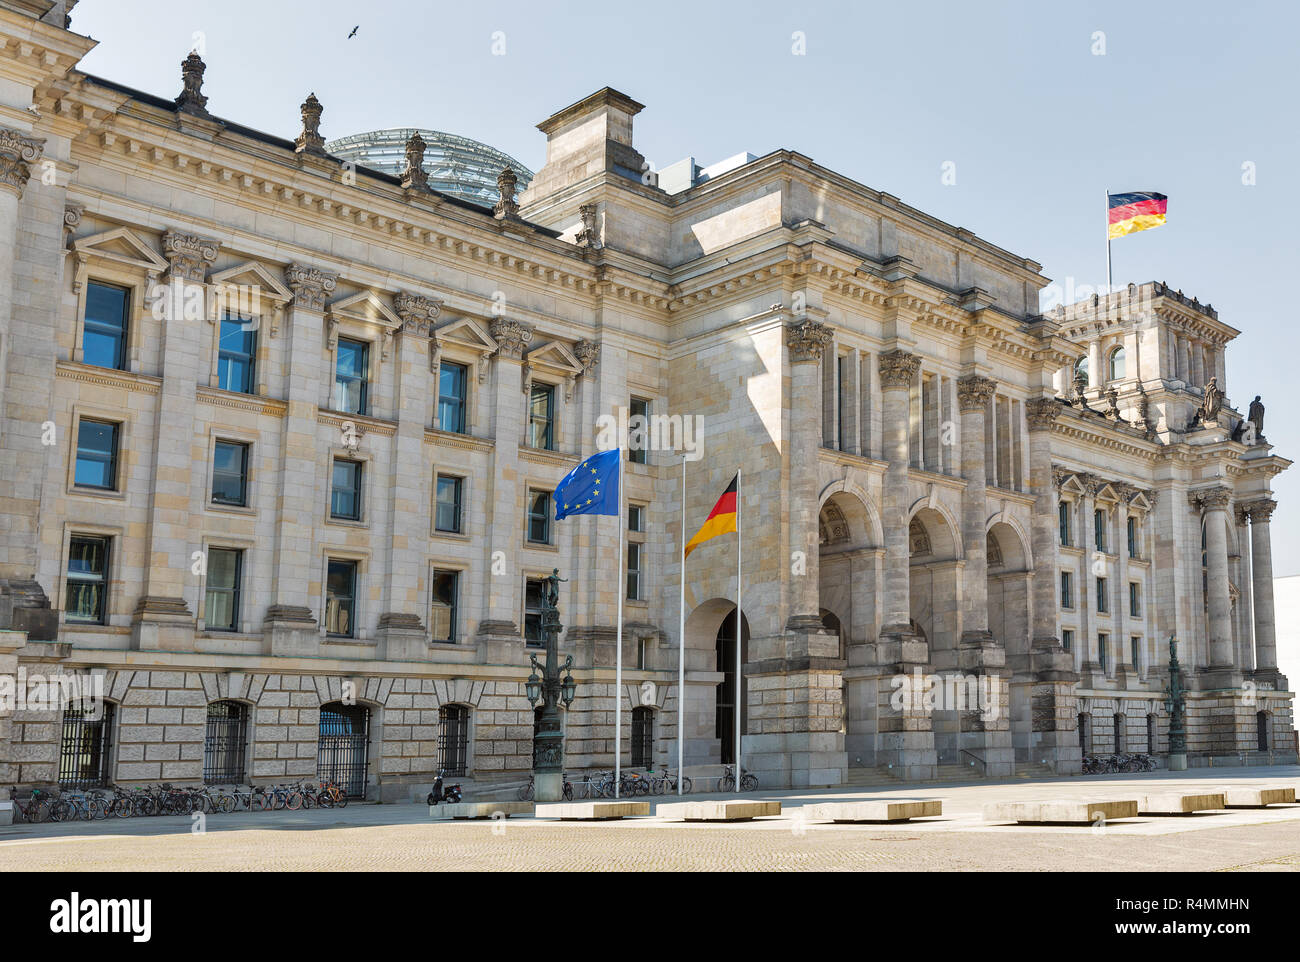 Parked bicycles in front of famous Reichstag or Bundestag building with German and EU flags, seat of the German Parliament. Berlin Mitte district, Ger Stock Photo